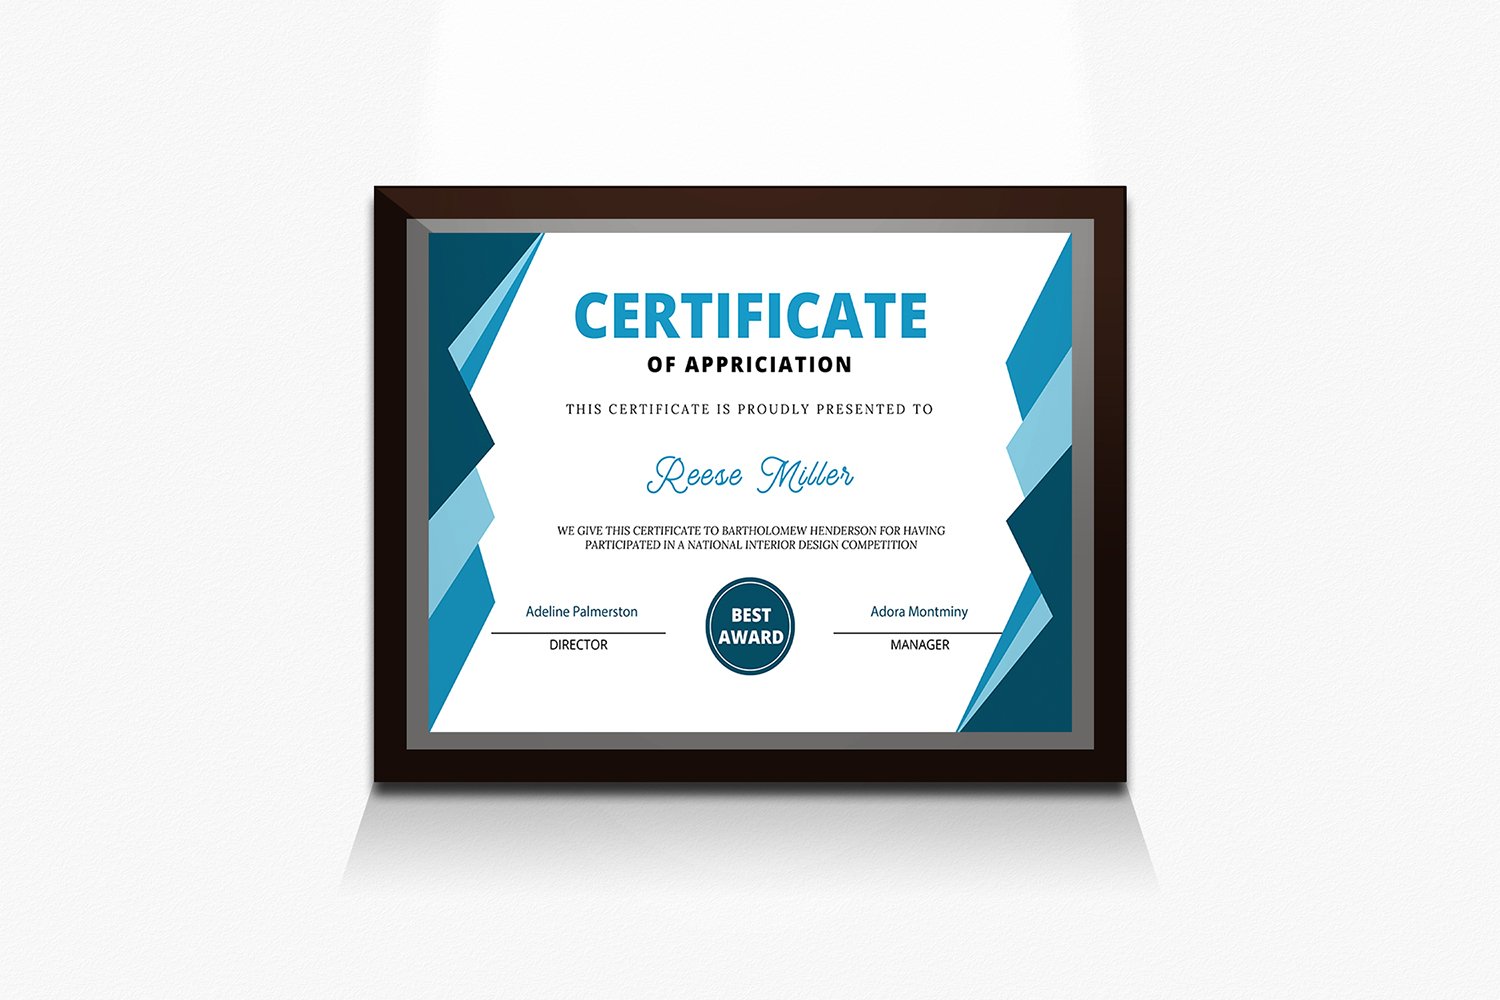 Certificate of Appreciation preview image.